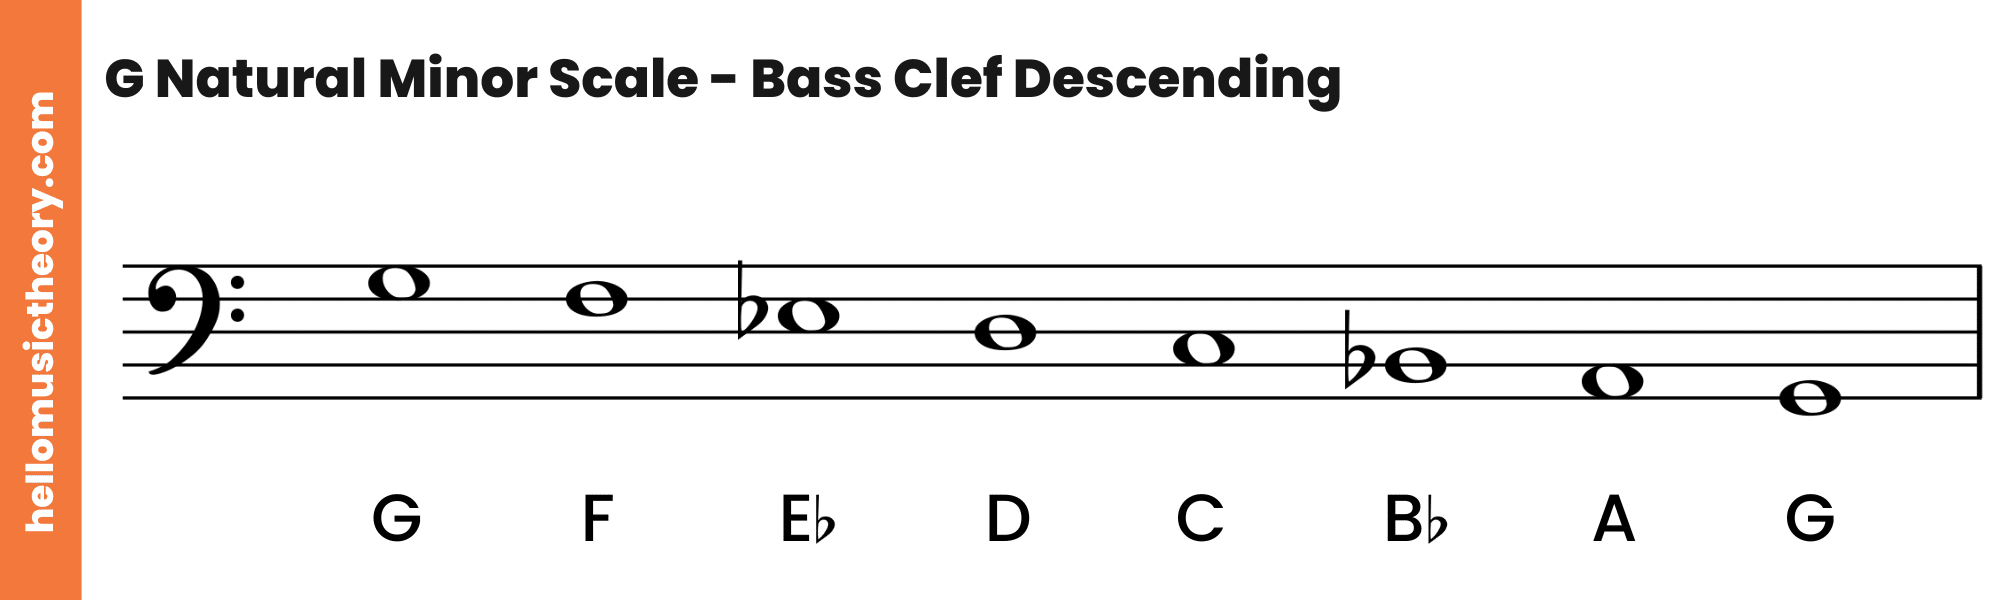 G Natural Minor Scale Bass Clef Descending